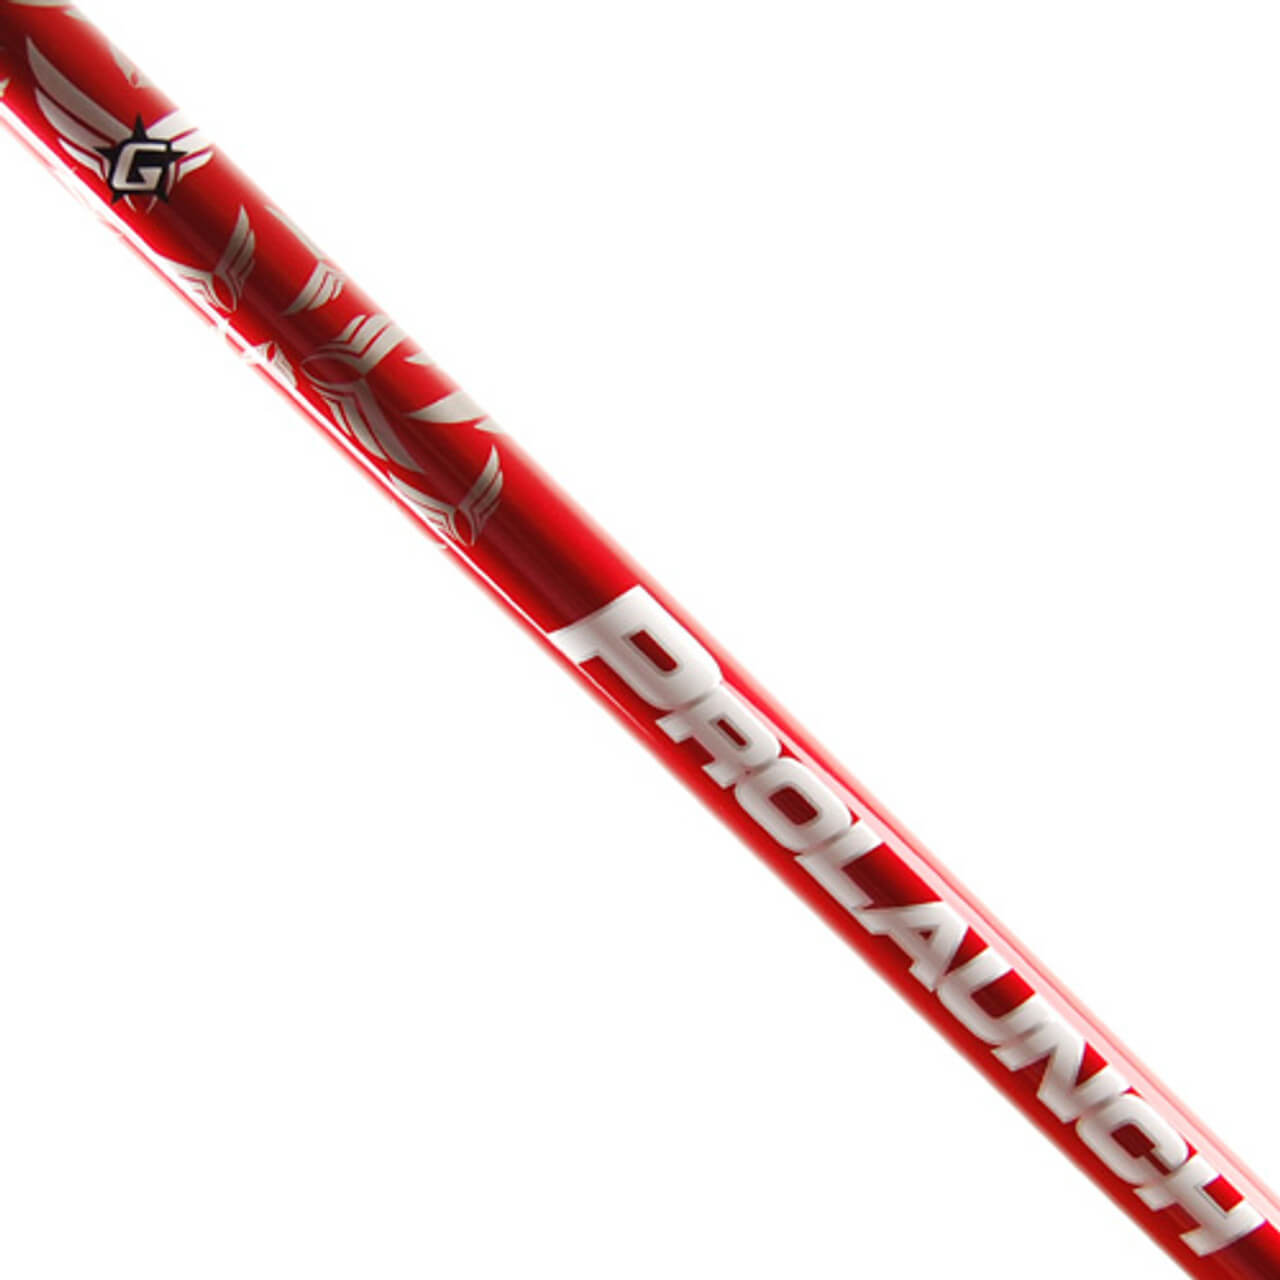 Grafalloy Prolaunch Red Shaft Review